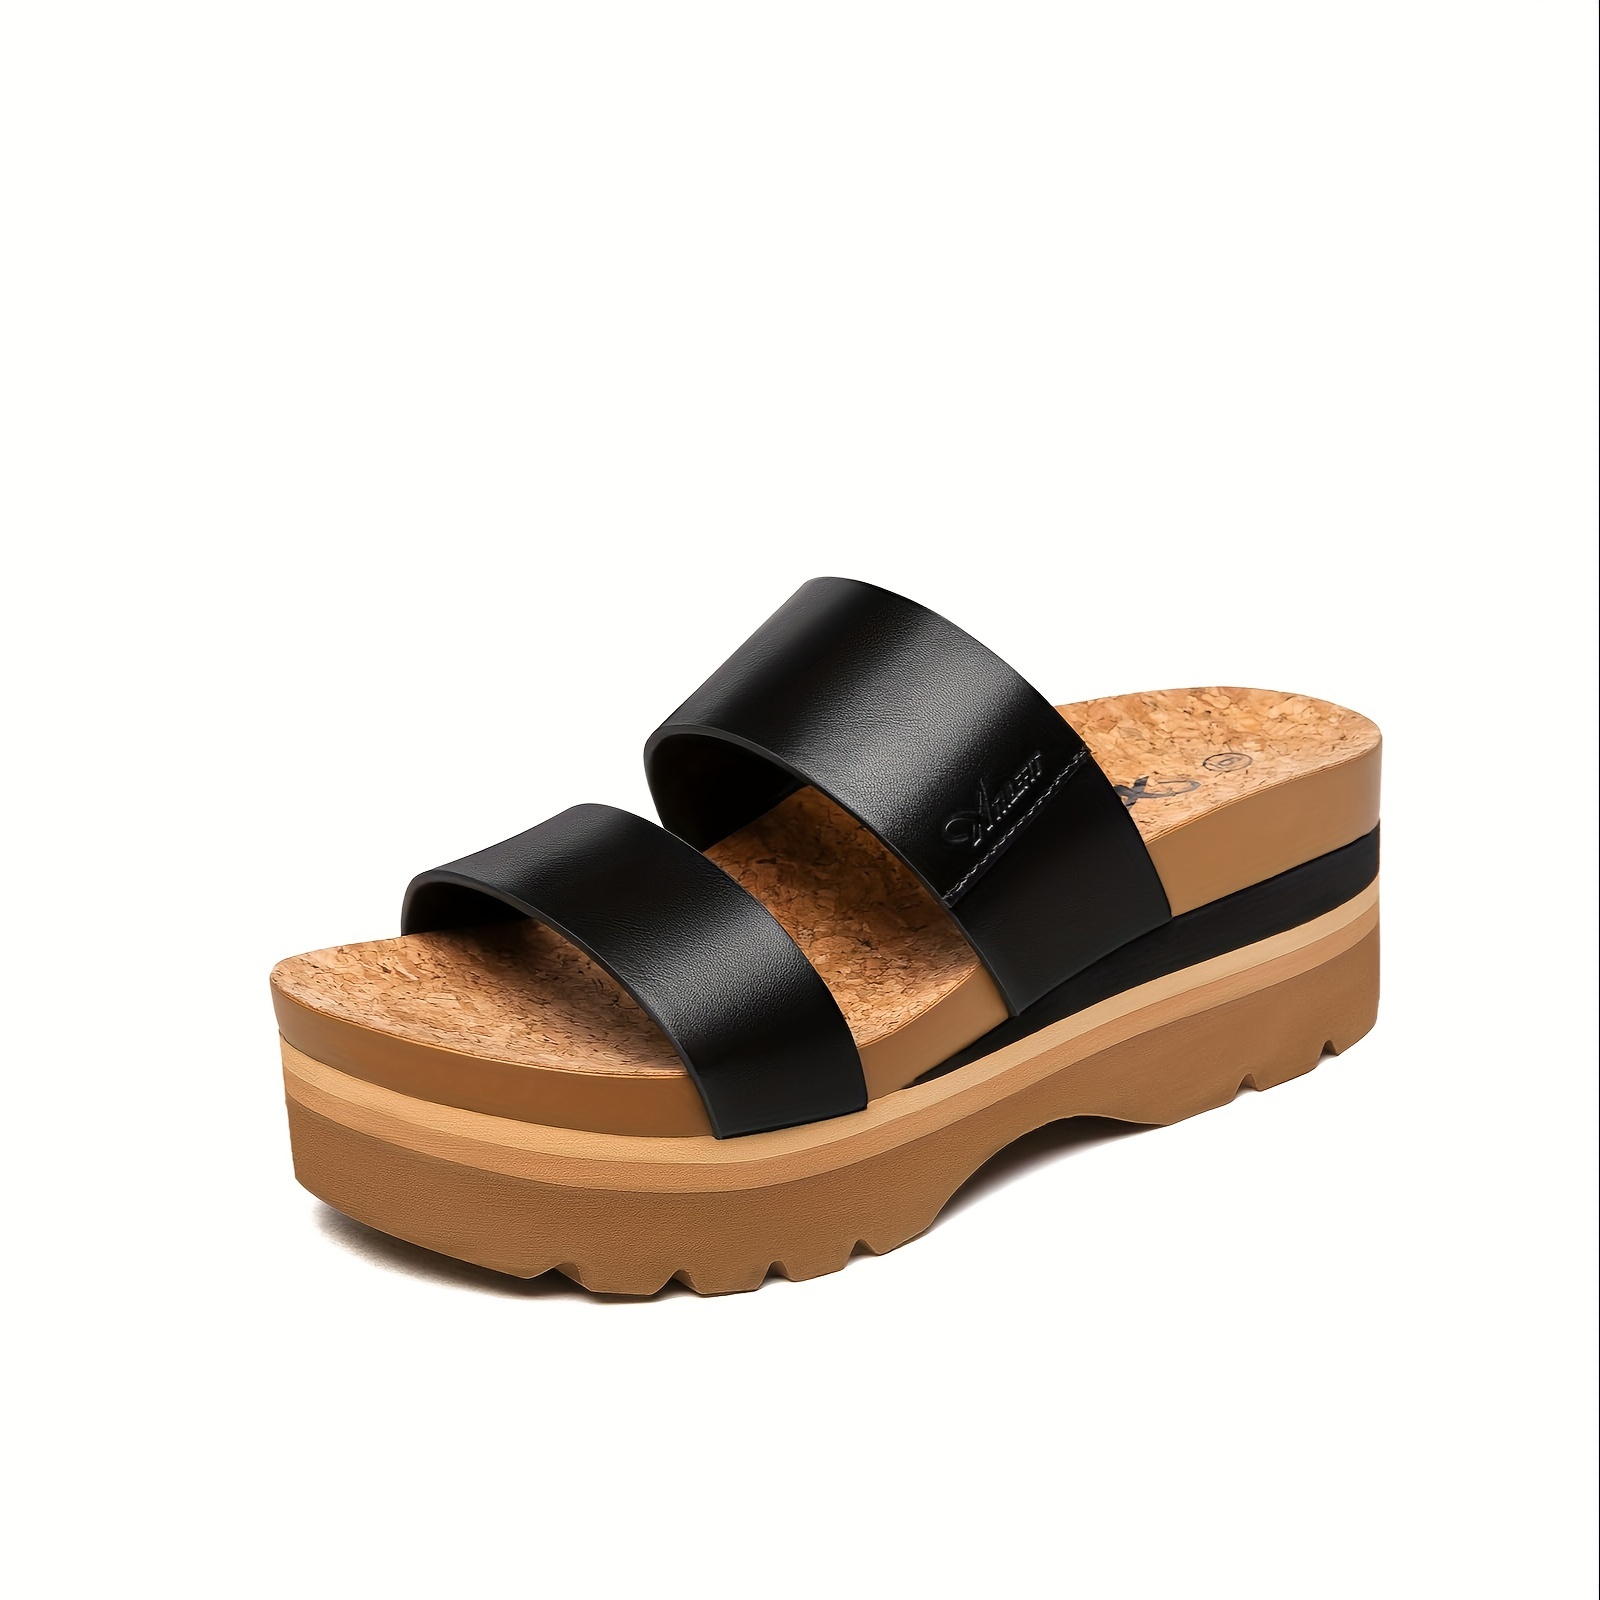 

Women's Platform Slides Sandals With Arch Support, Comfortable Beach Slip-on Flat Sandals, Casual 2-strap Cork Cushion Wedges For Women